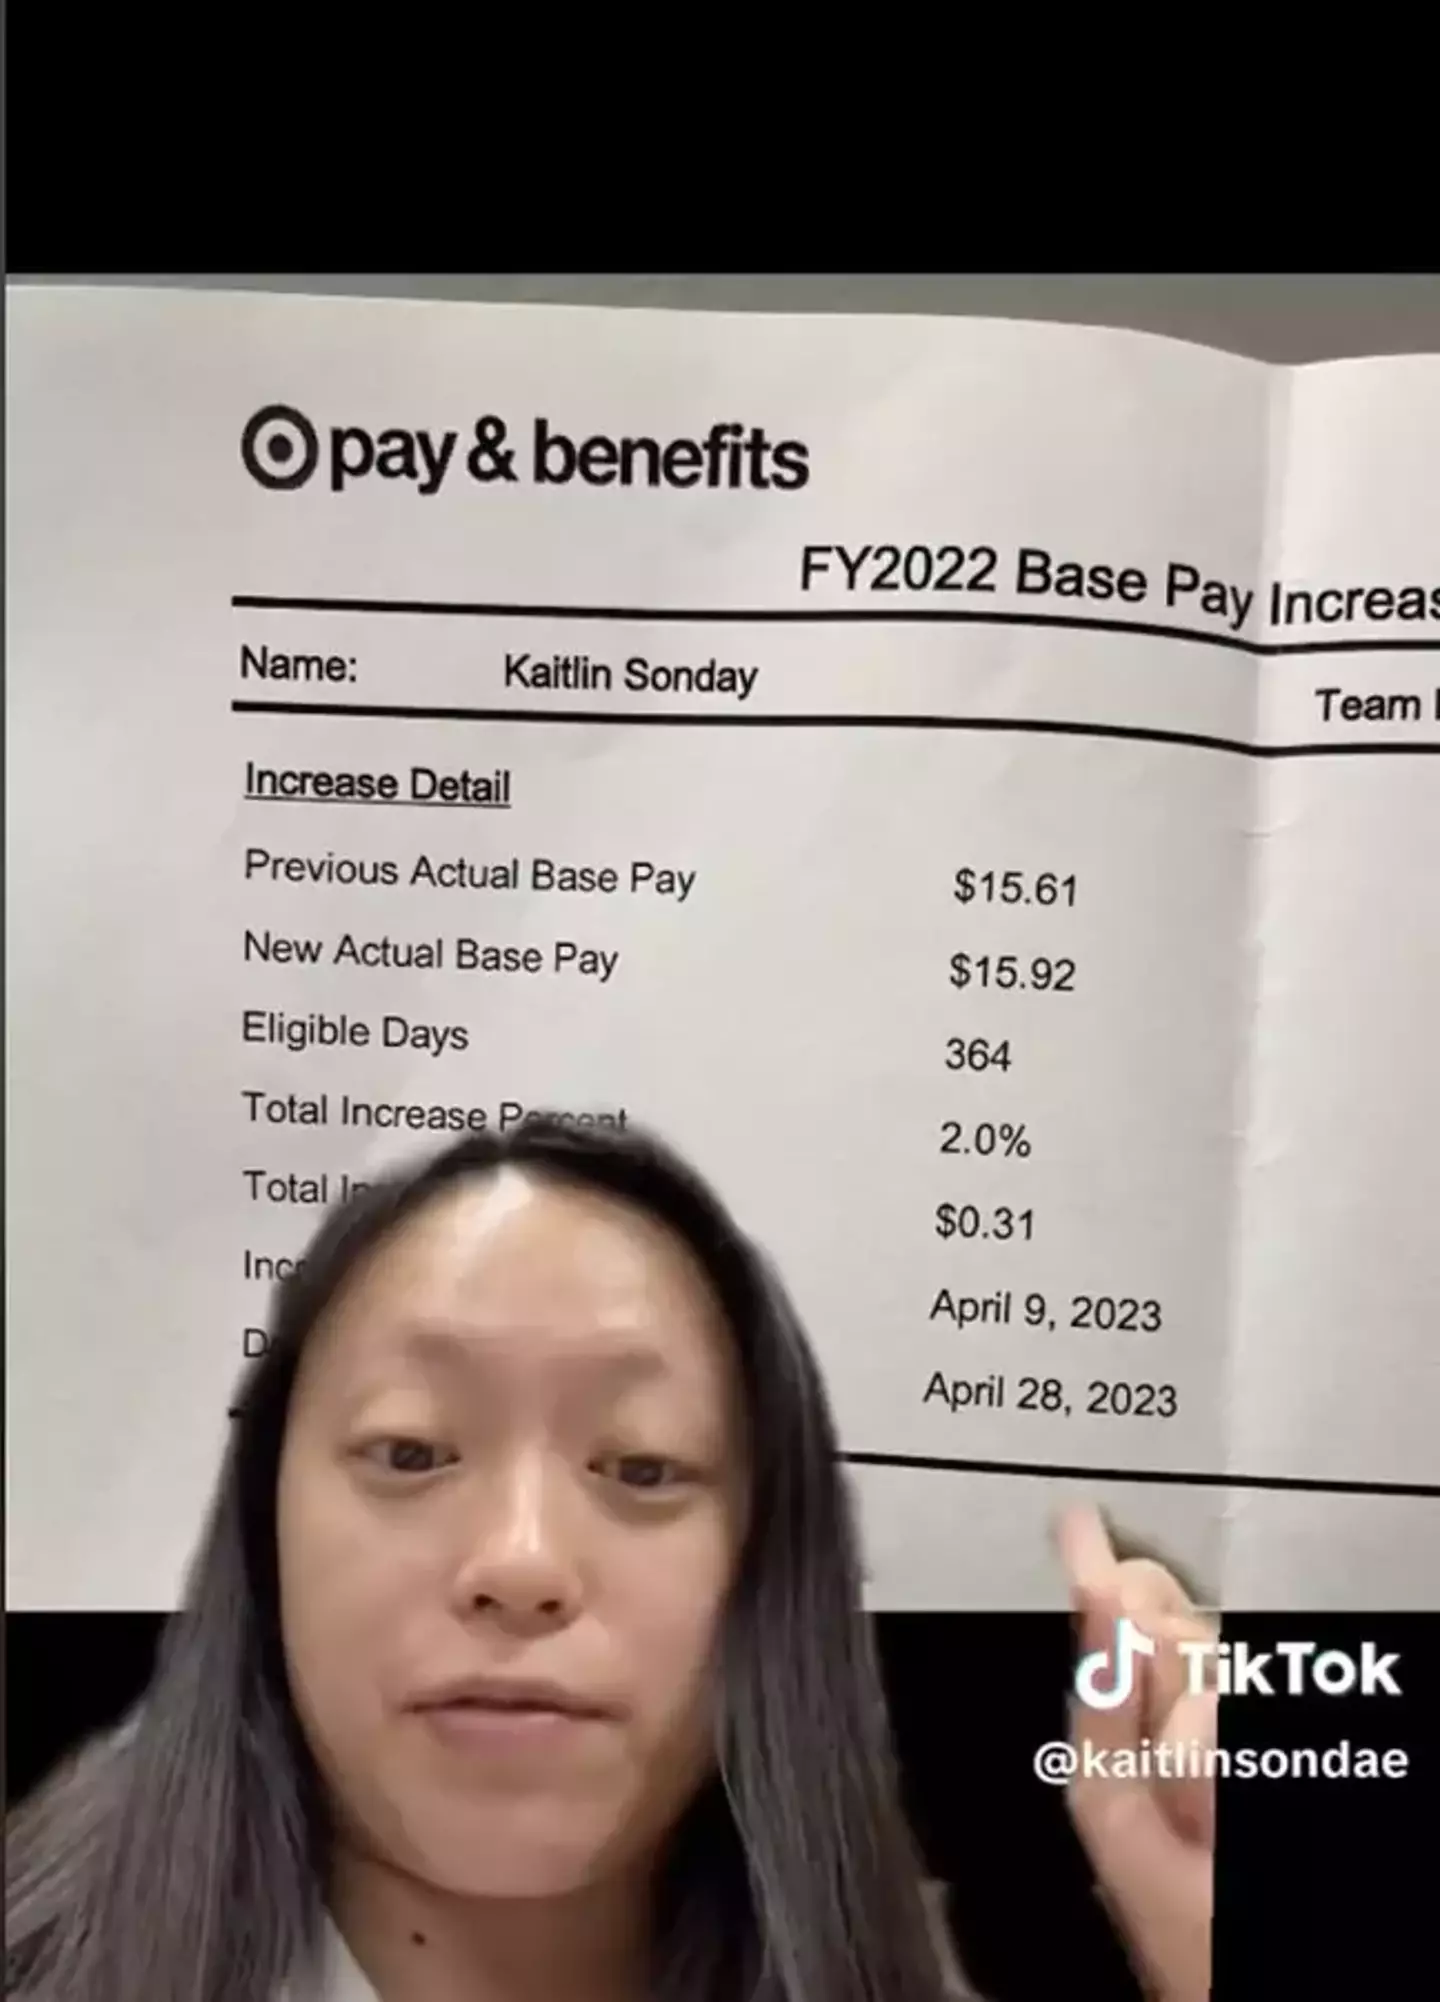 Kaitlin showed that she had received a 2 percent pay rise this year.